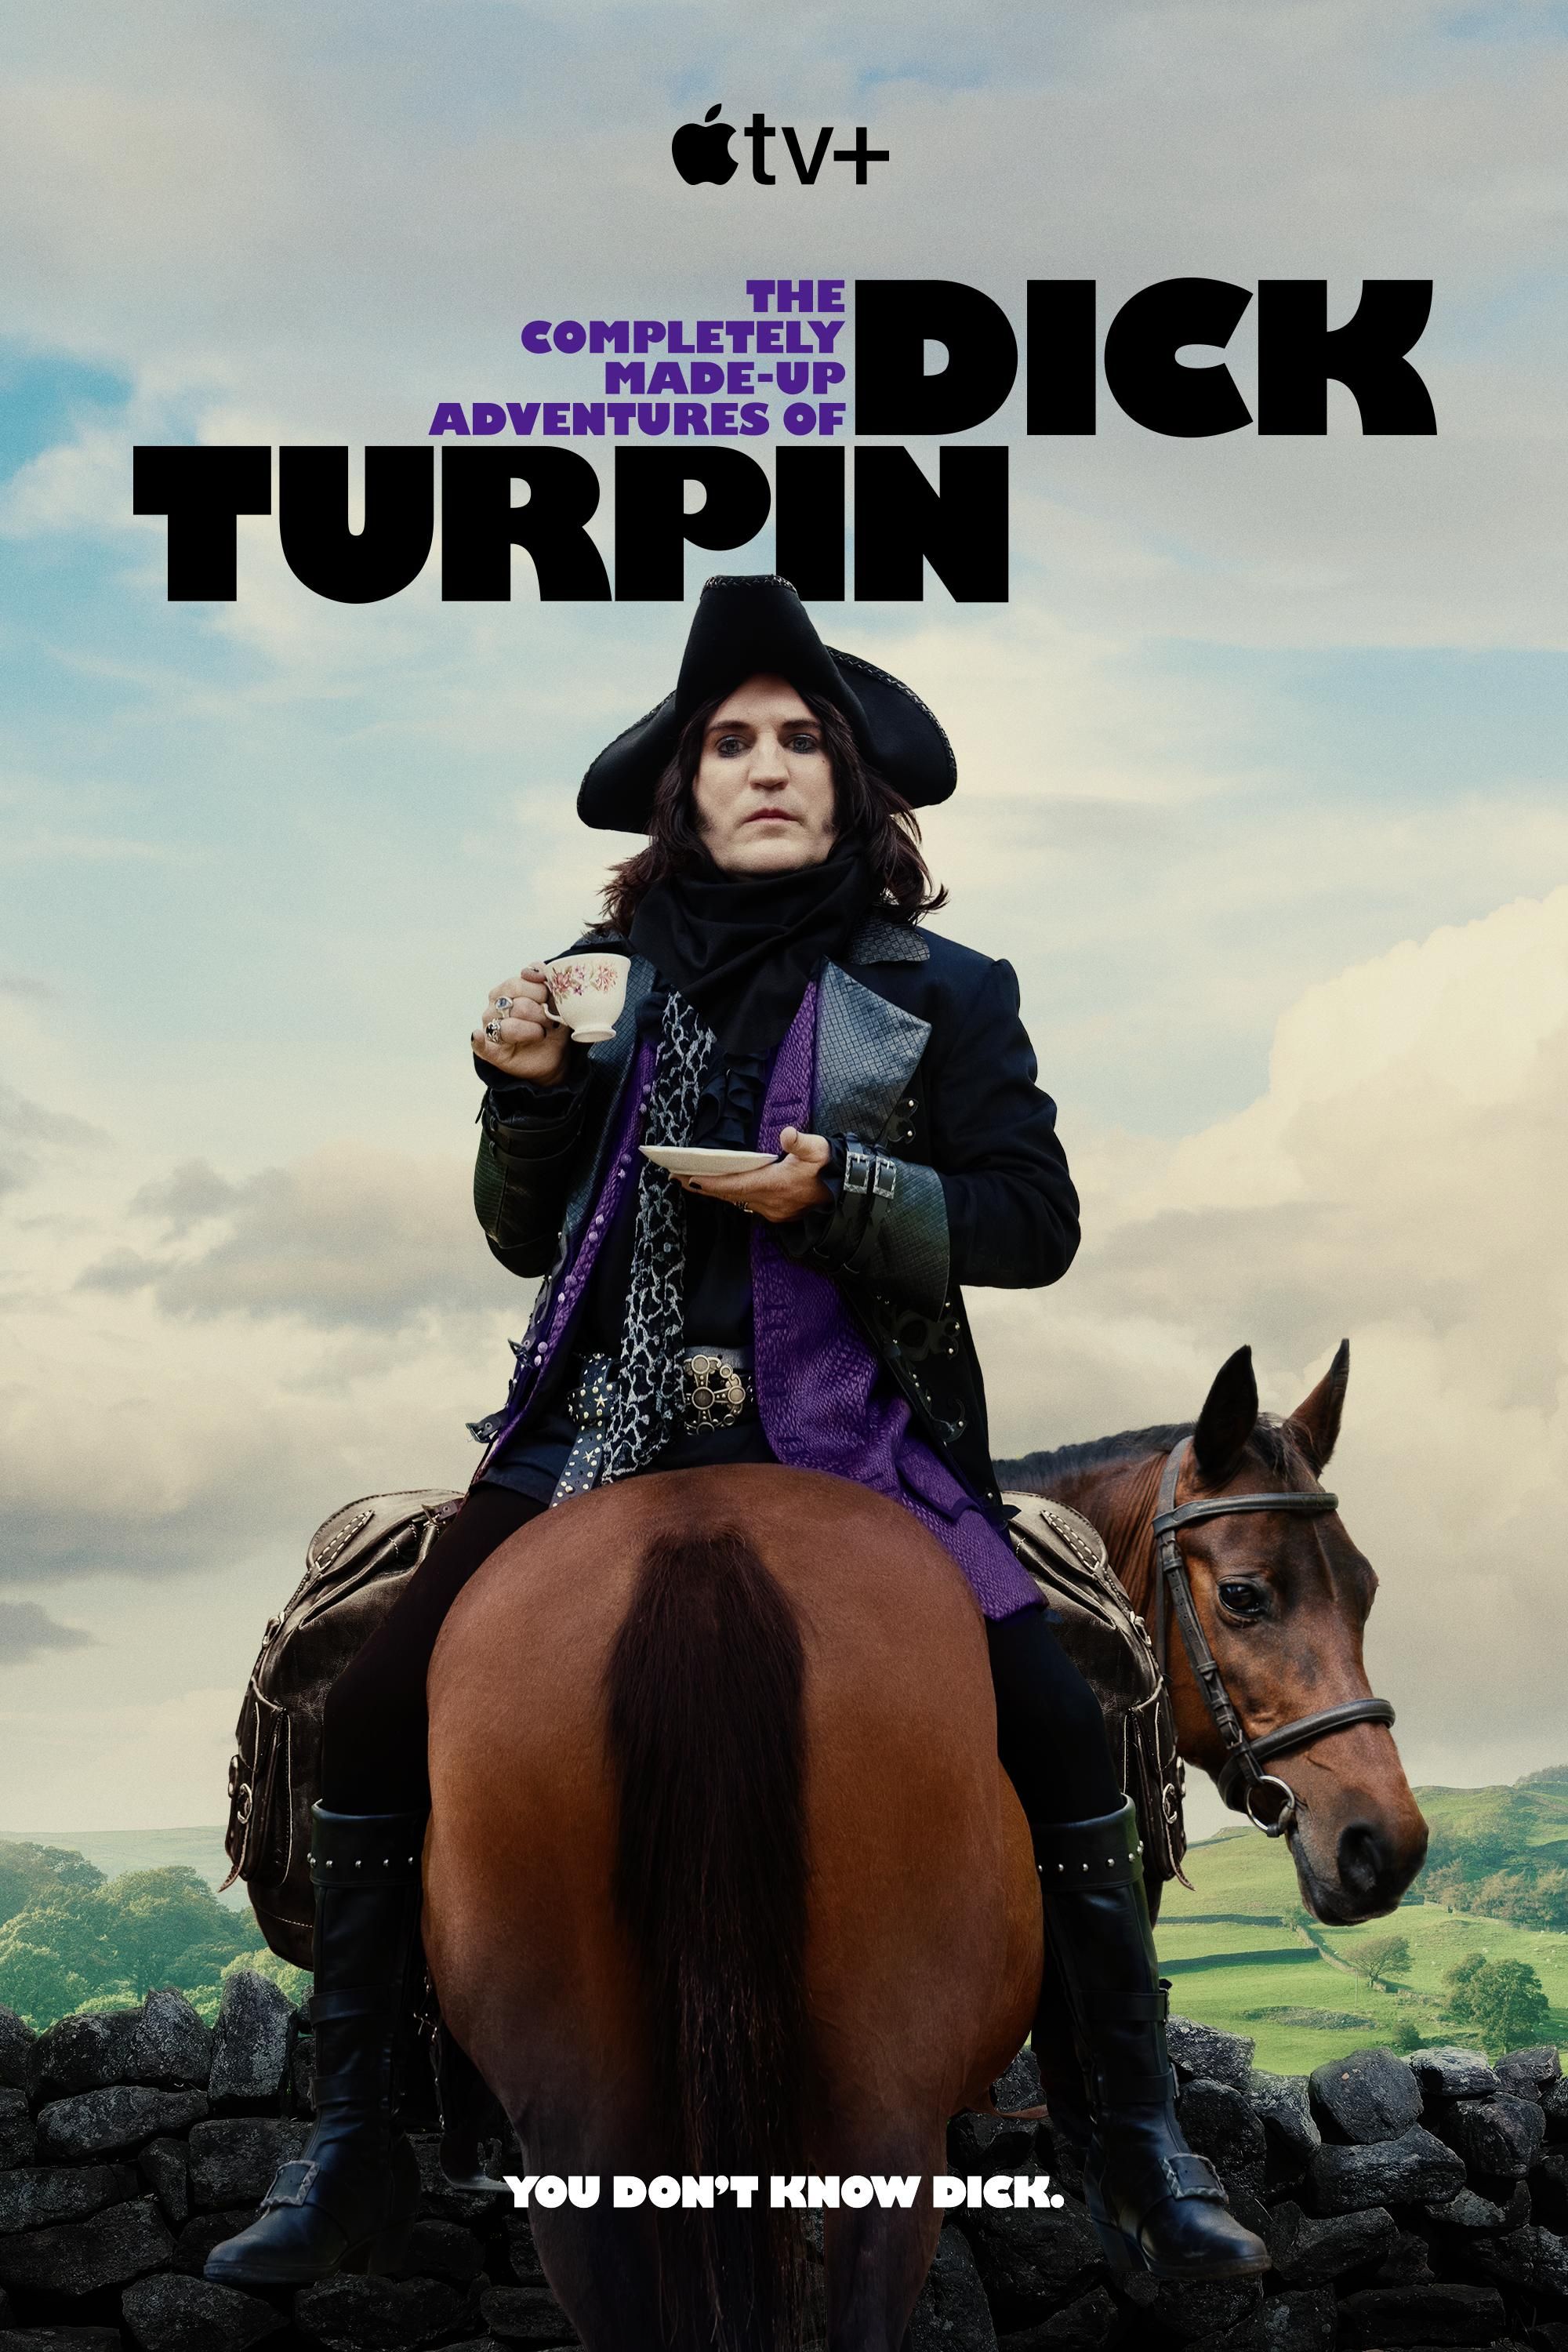 The True Story Behind 'The Completely MadeUp Adventures of Dick Turpin'